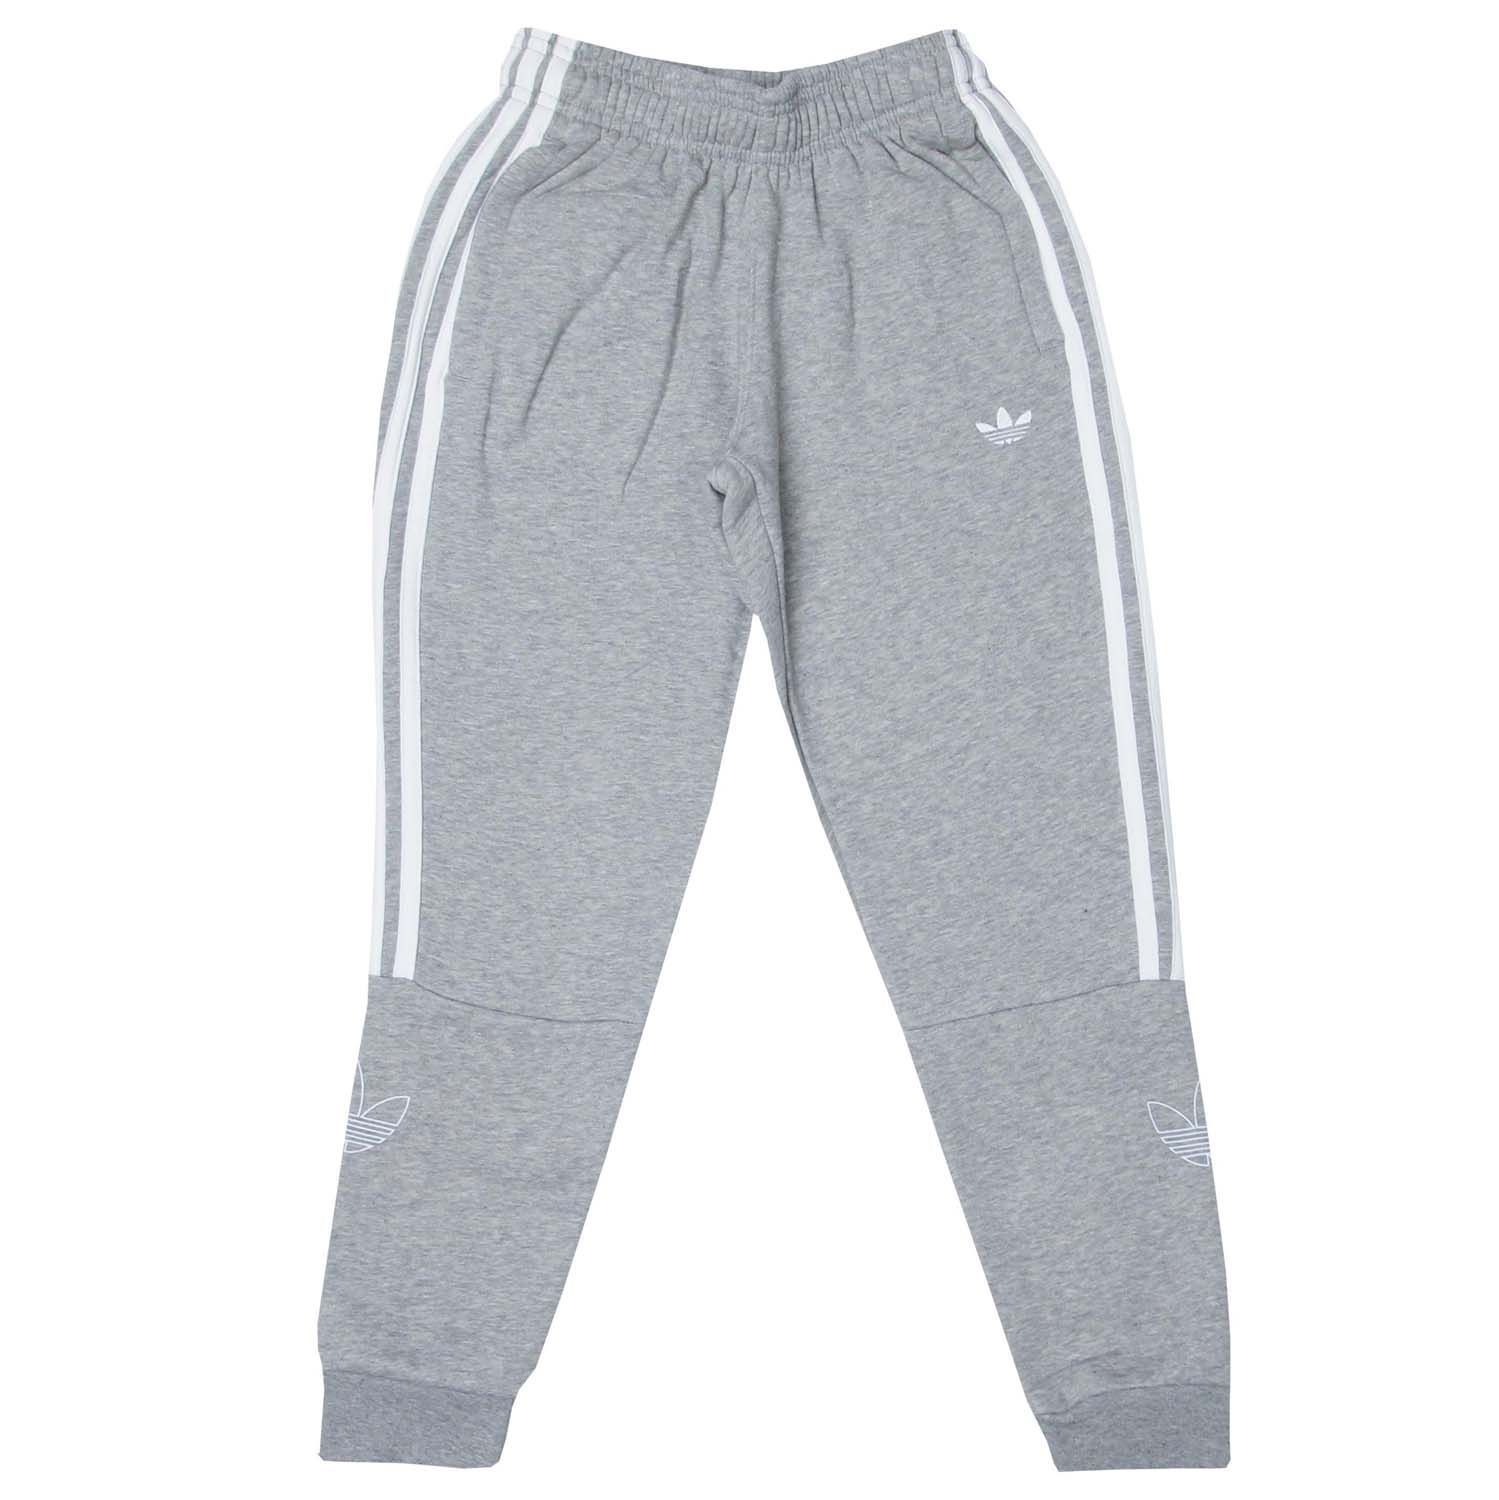 Junior Boys adidas Originals Outline Pants in grey heather.- Drawcord on elastic waist.- Back pocket.- Side pockets.- Ribbed cuffs.- Fleece.- Embroidered Trefoil logo.- 3- Stripes design.- Regular fit.- Main Material: 77% Cotton  23% Polyester (Recycled). Rib Part: 95% Cotton  5% Elastane.- Ref: ED7854J